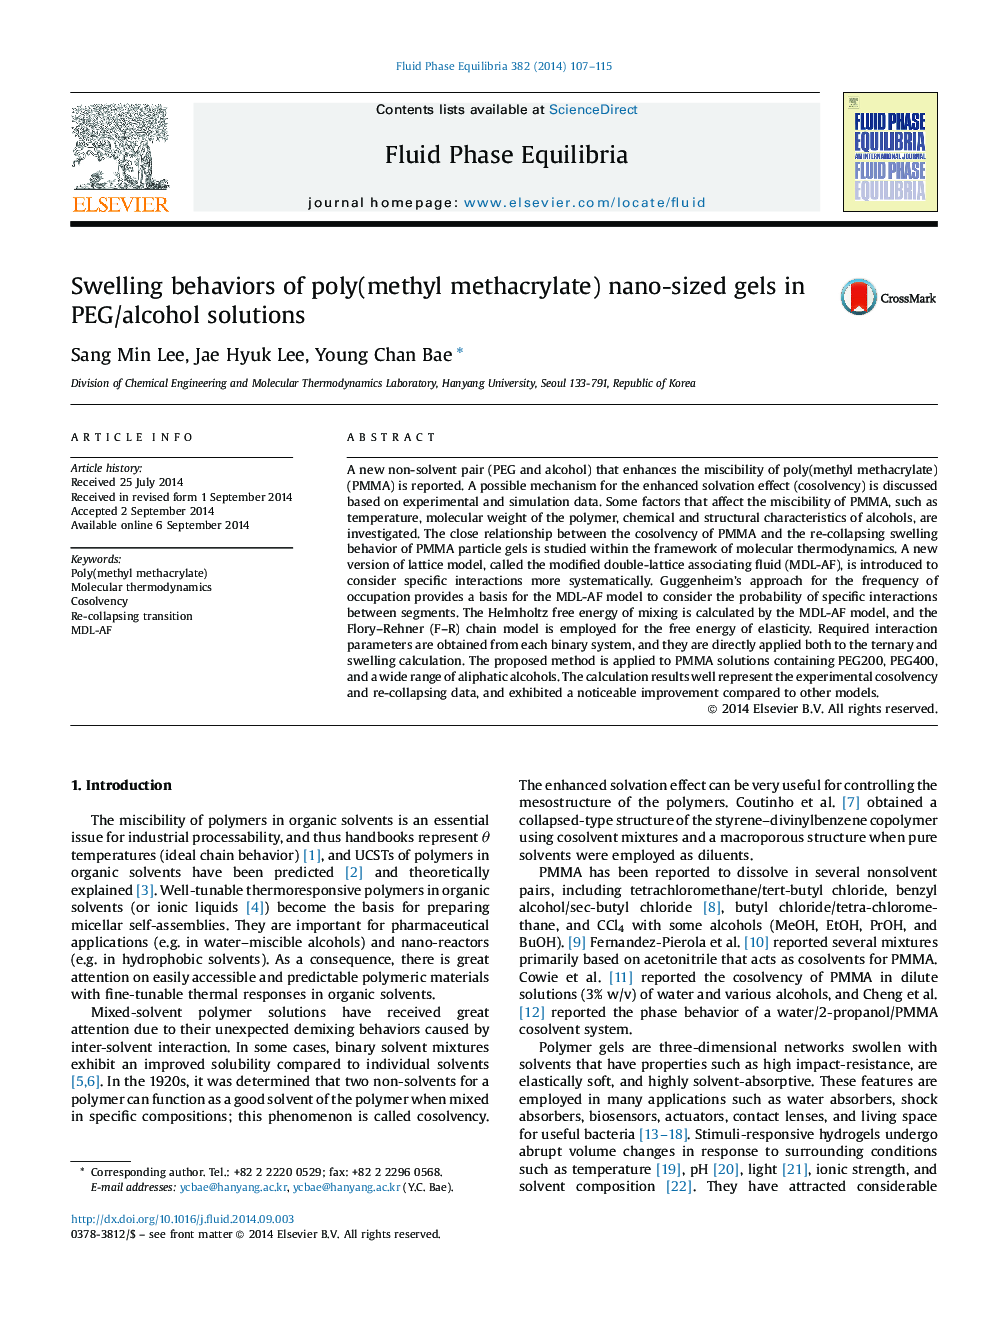 Swelling behaviors of poly(methyl methacrylate) nano-sized gels in PEG/alcohol solutions